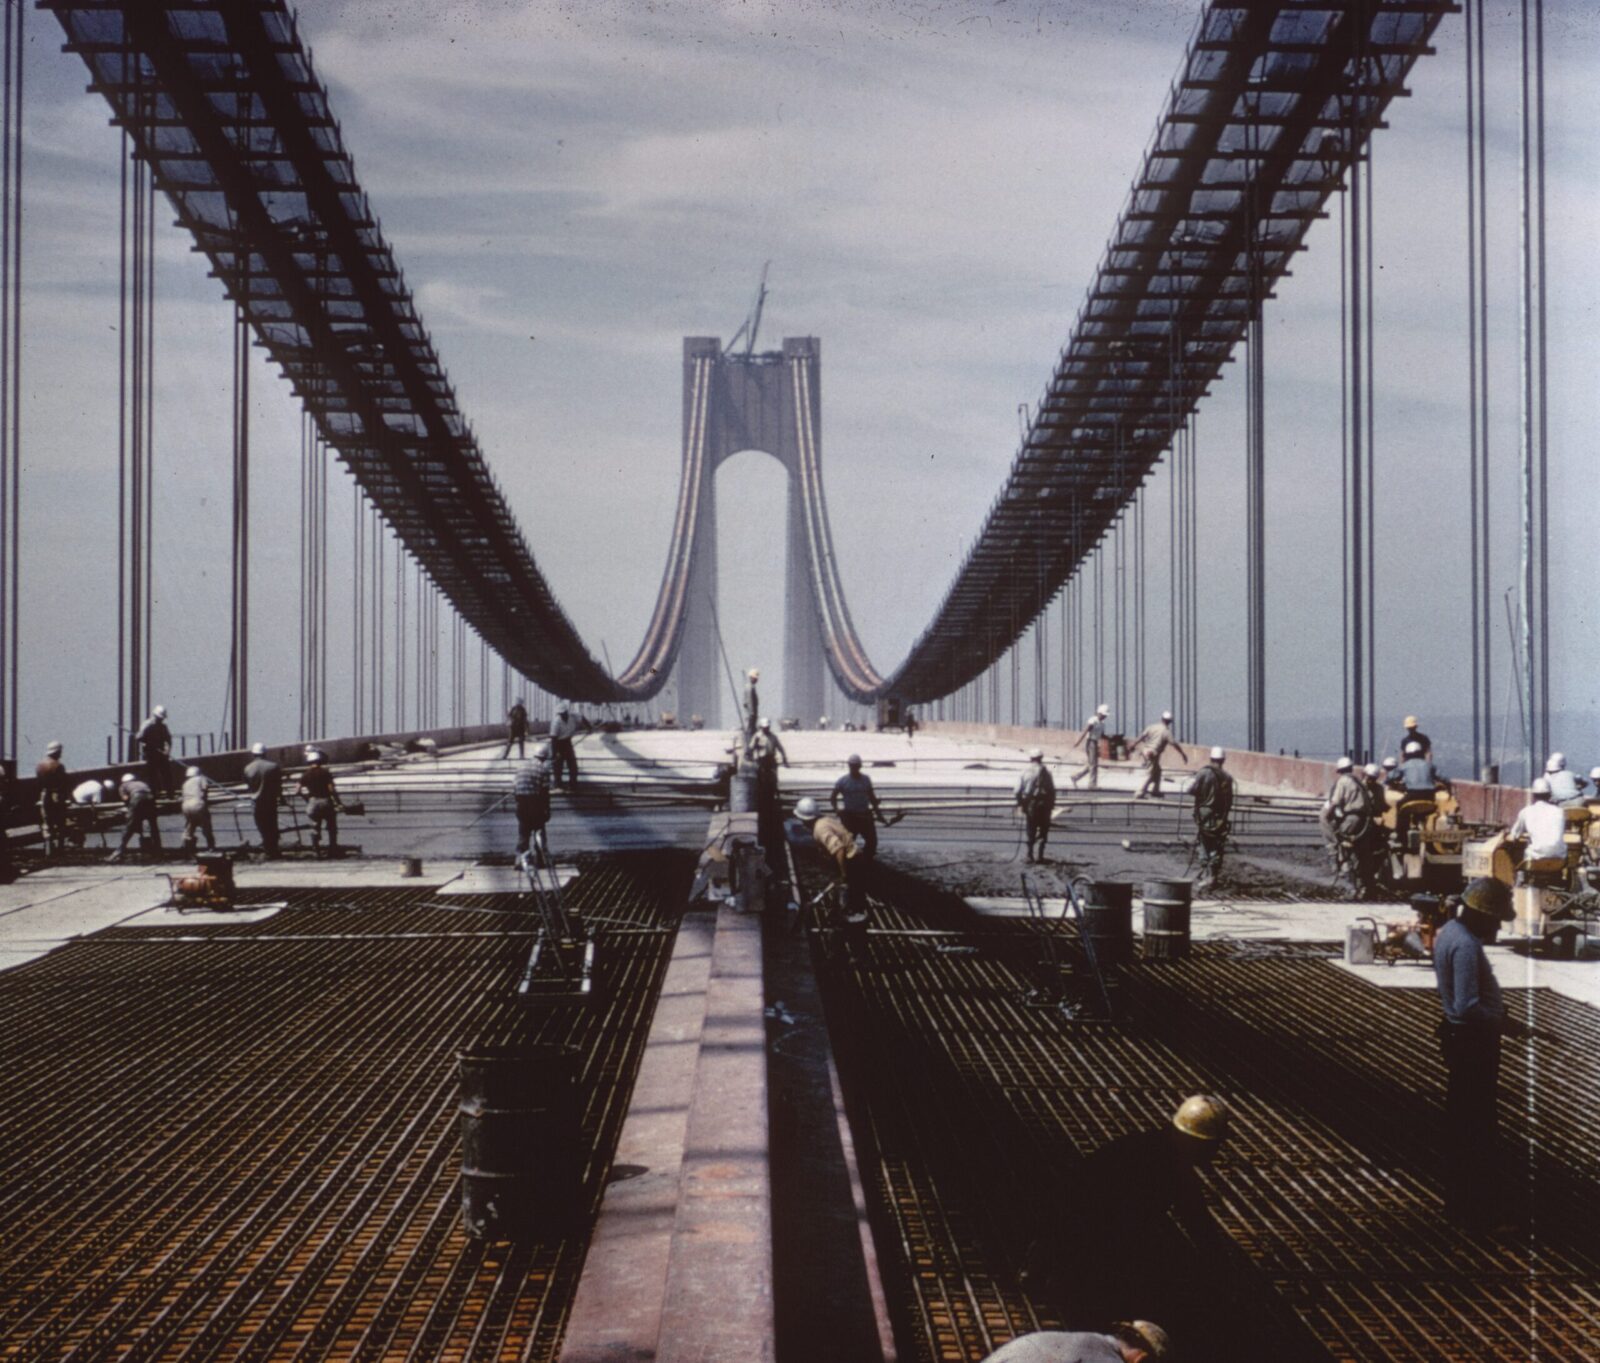 The Verrazzano-Narrows Bridge during construction in 1964: more than 12,000 workers used a total of 200,000 kilometres of steel wire to make the bearing cables.